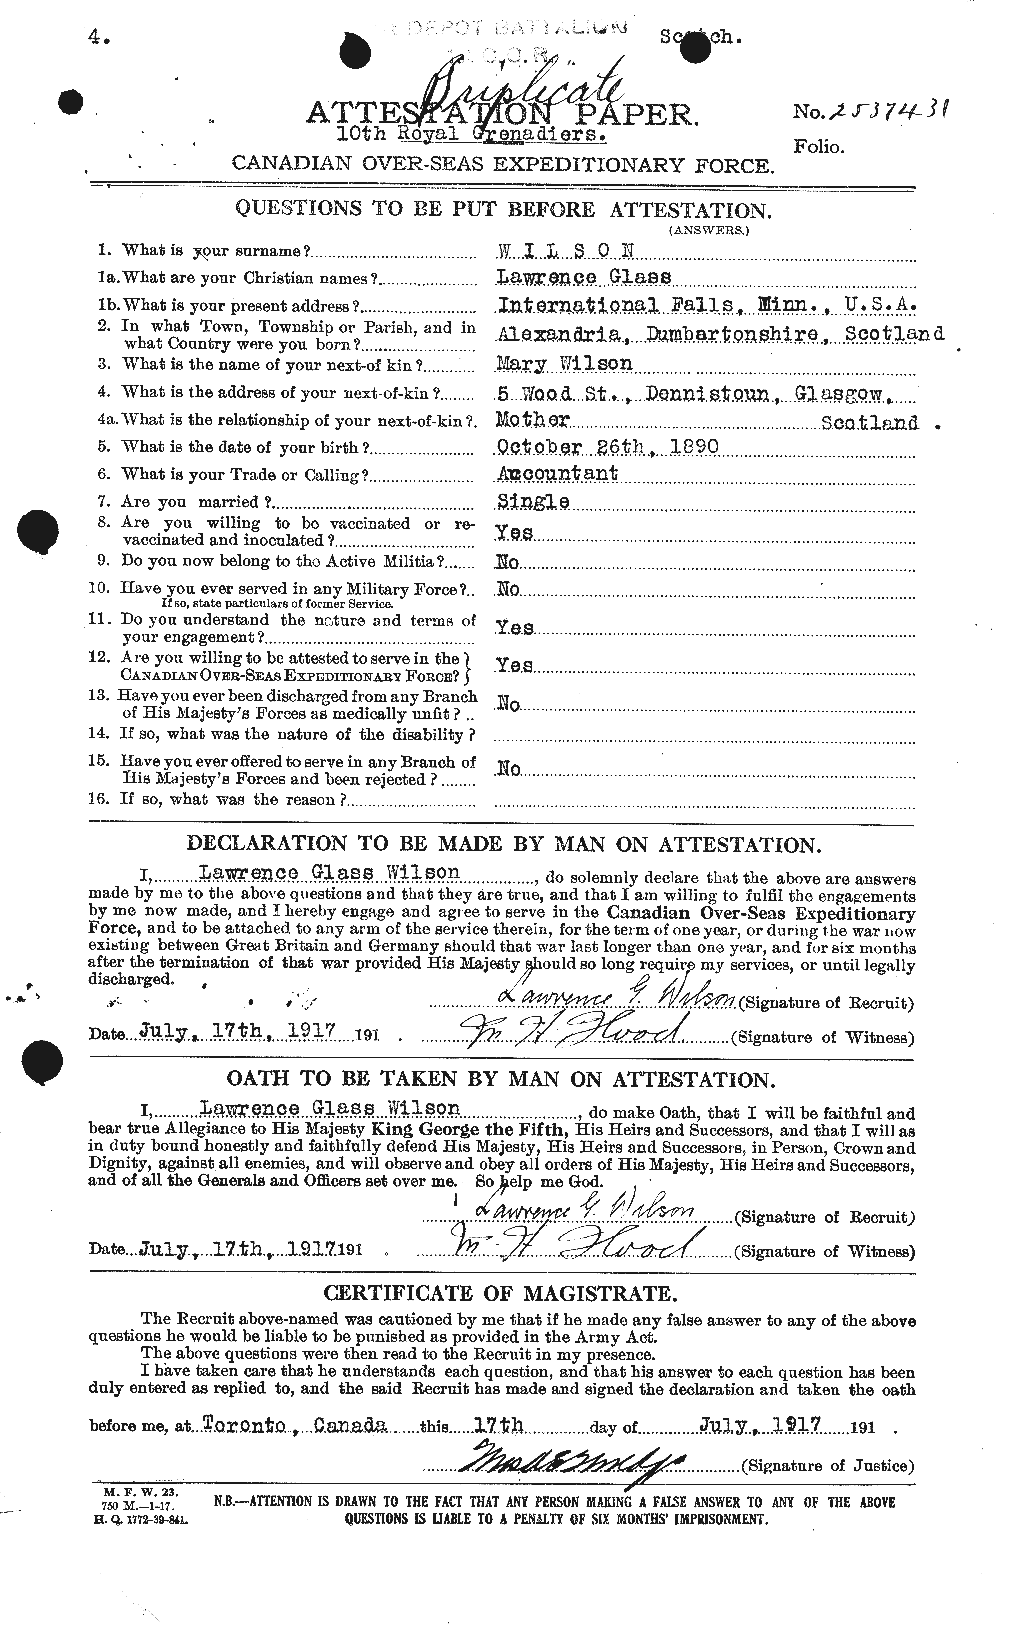 Personnel Records of the First World War - CEF 678621a